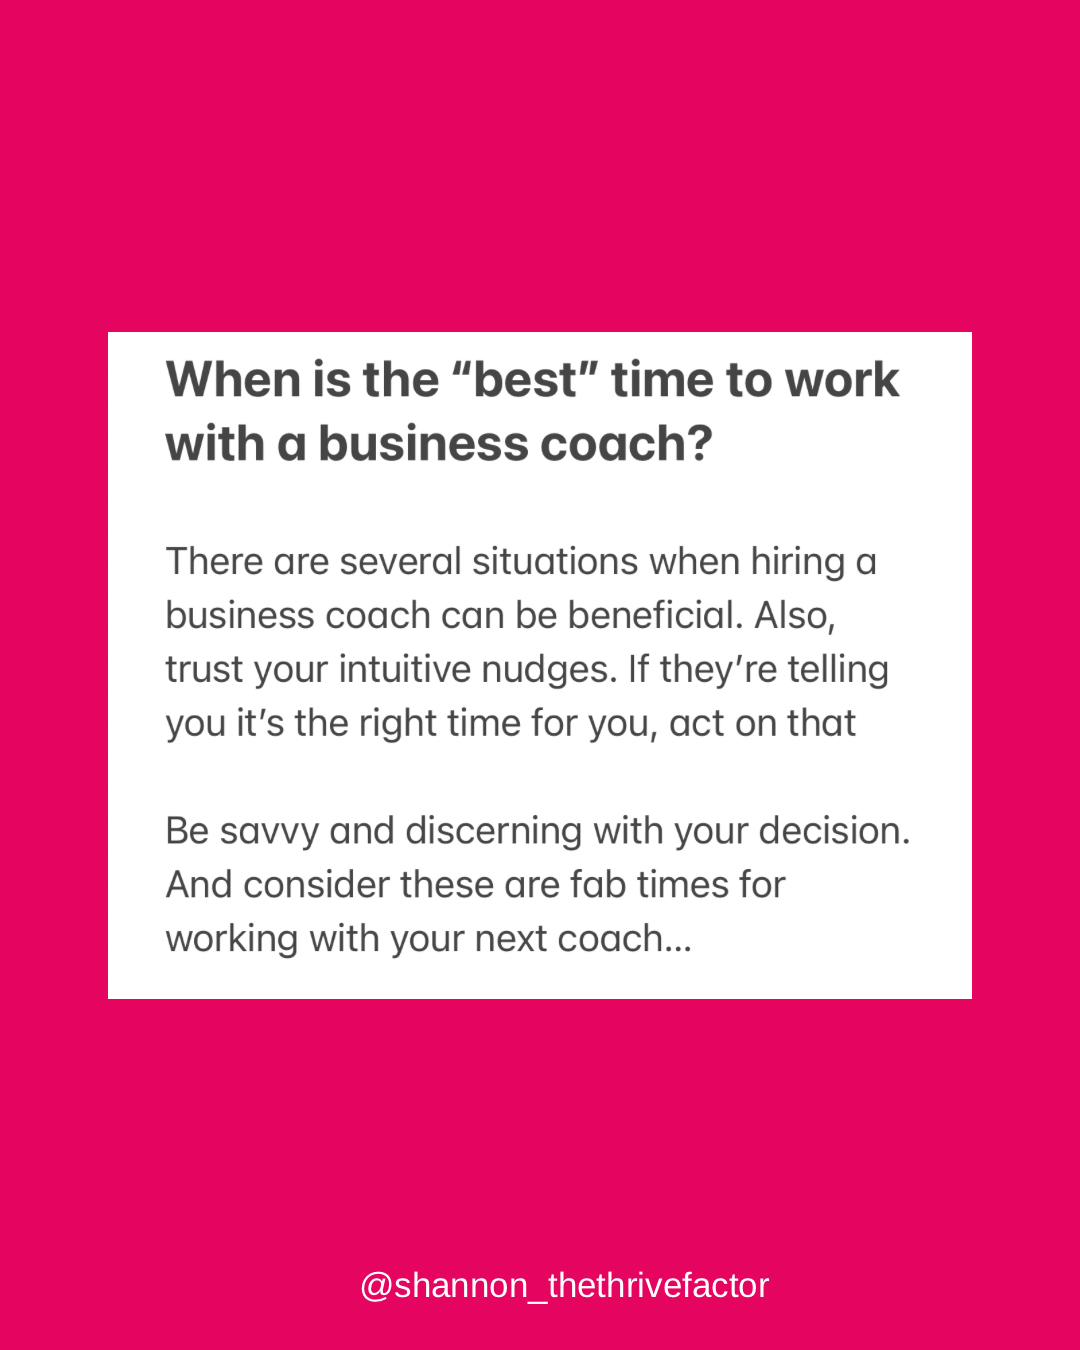 Best time to work with a coach | Shannon Dunn | Business self leadership coach Perth Australia | Thrive Factor profiling Archetypes for women